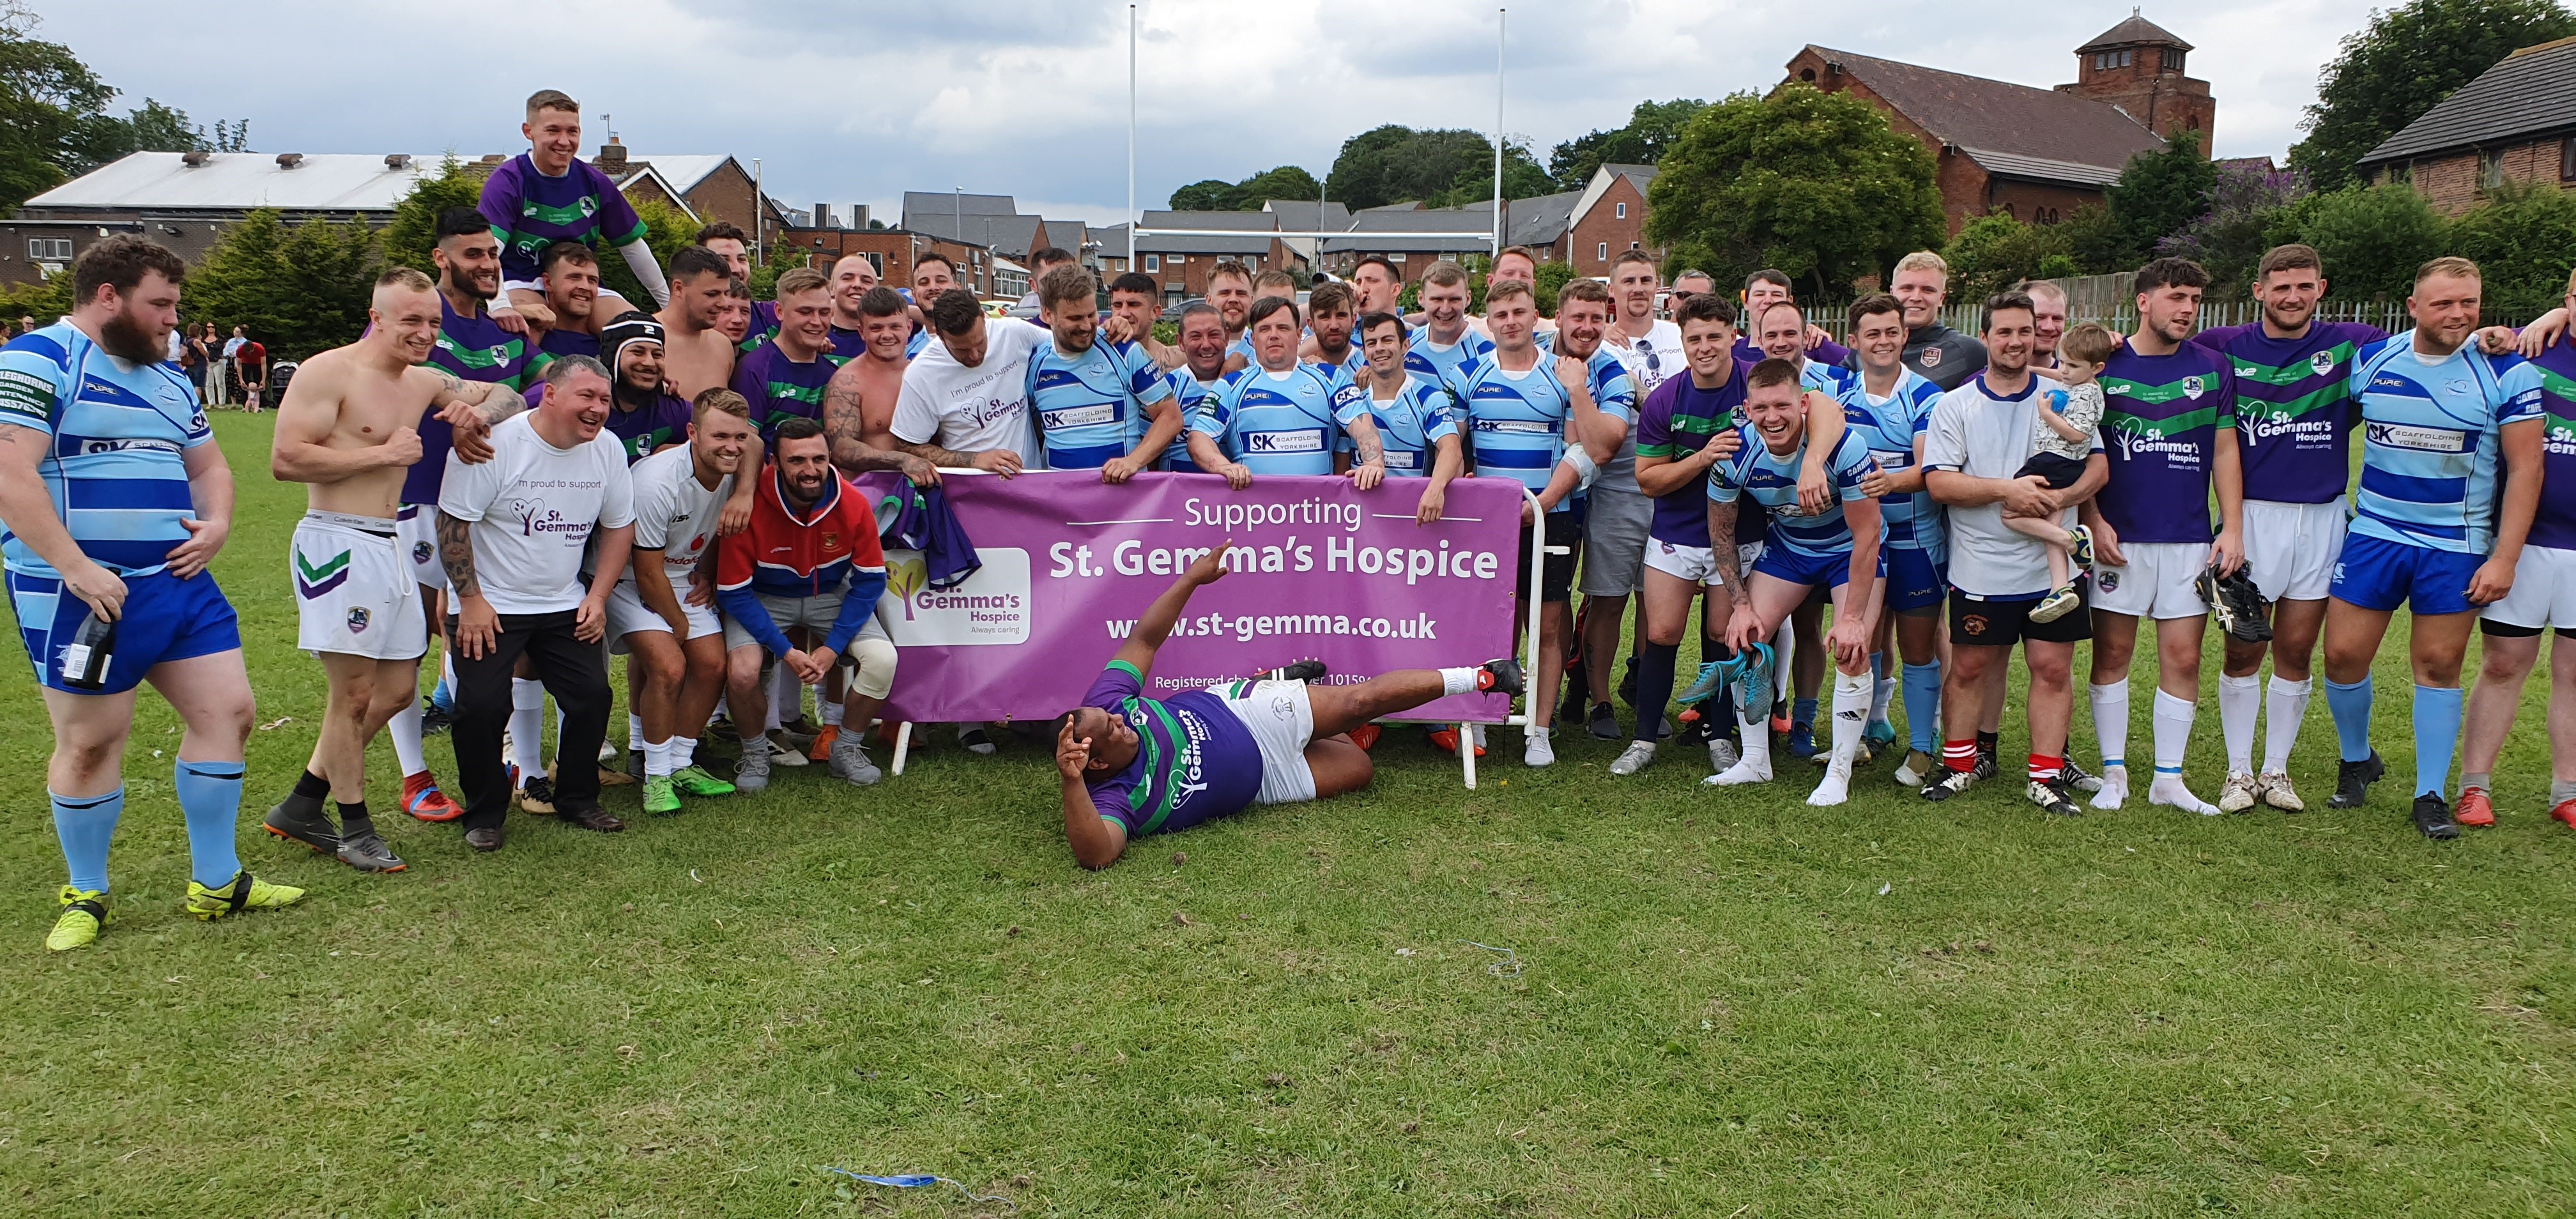 Large group of men in rugby kits holding a banner that reads: "Supporting St Gemma's Hospice".